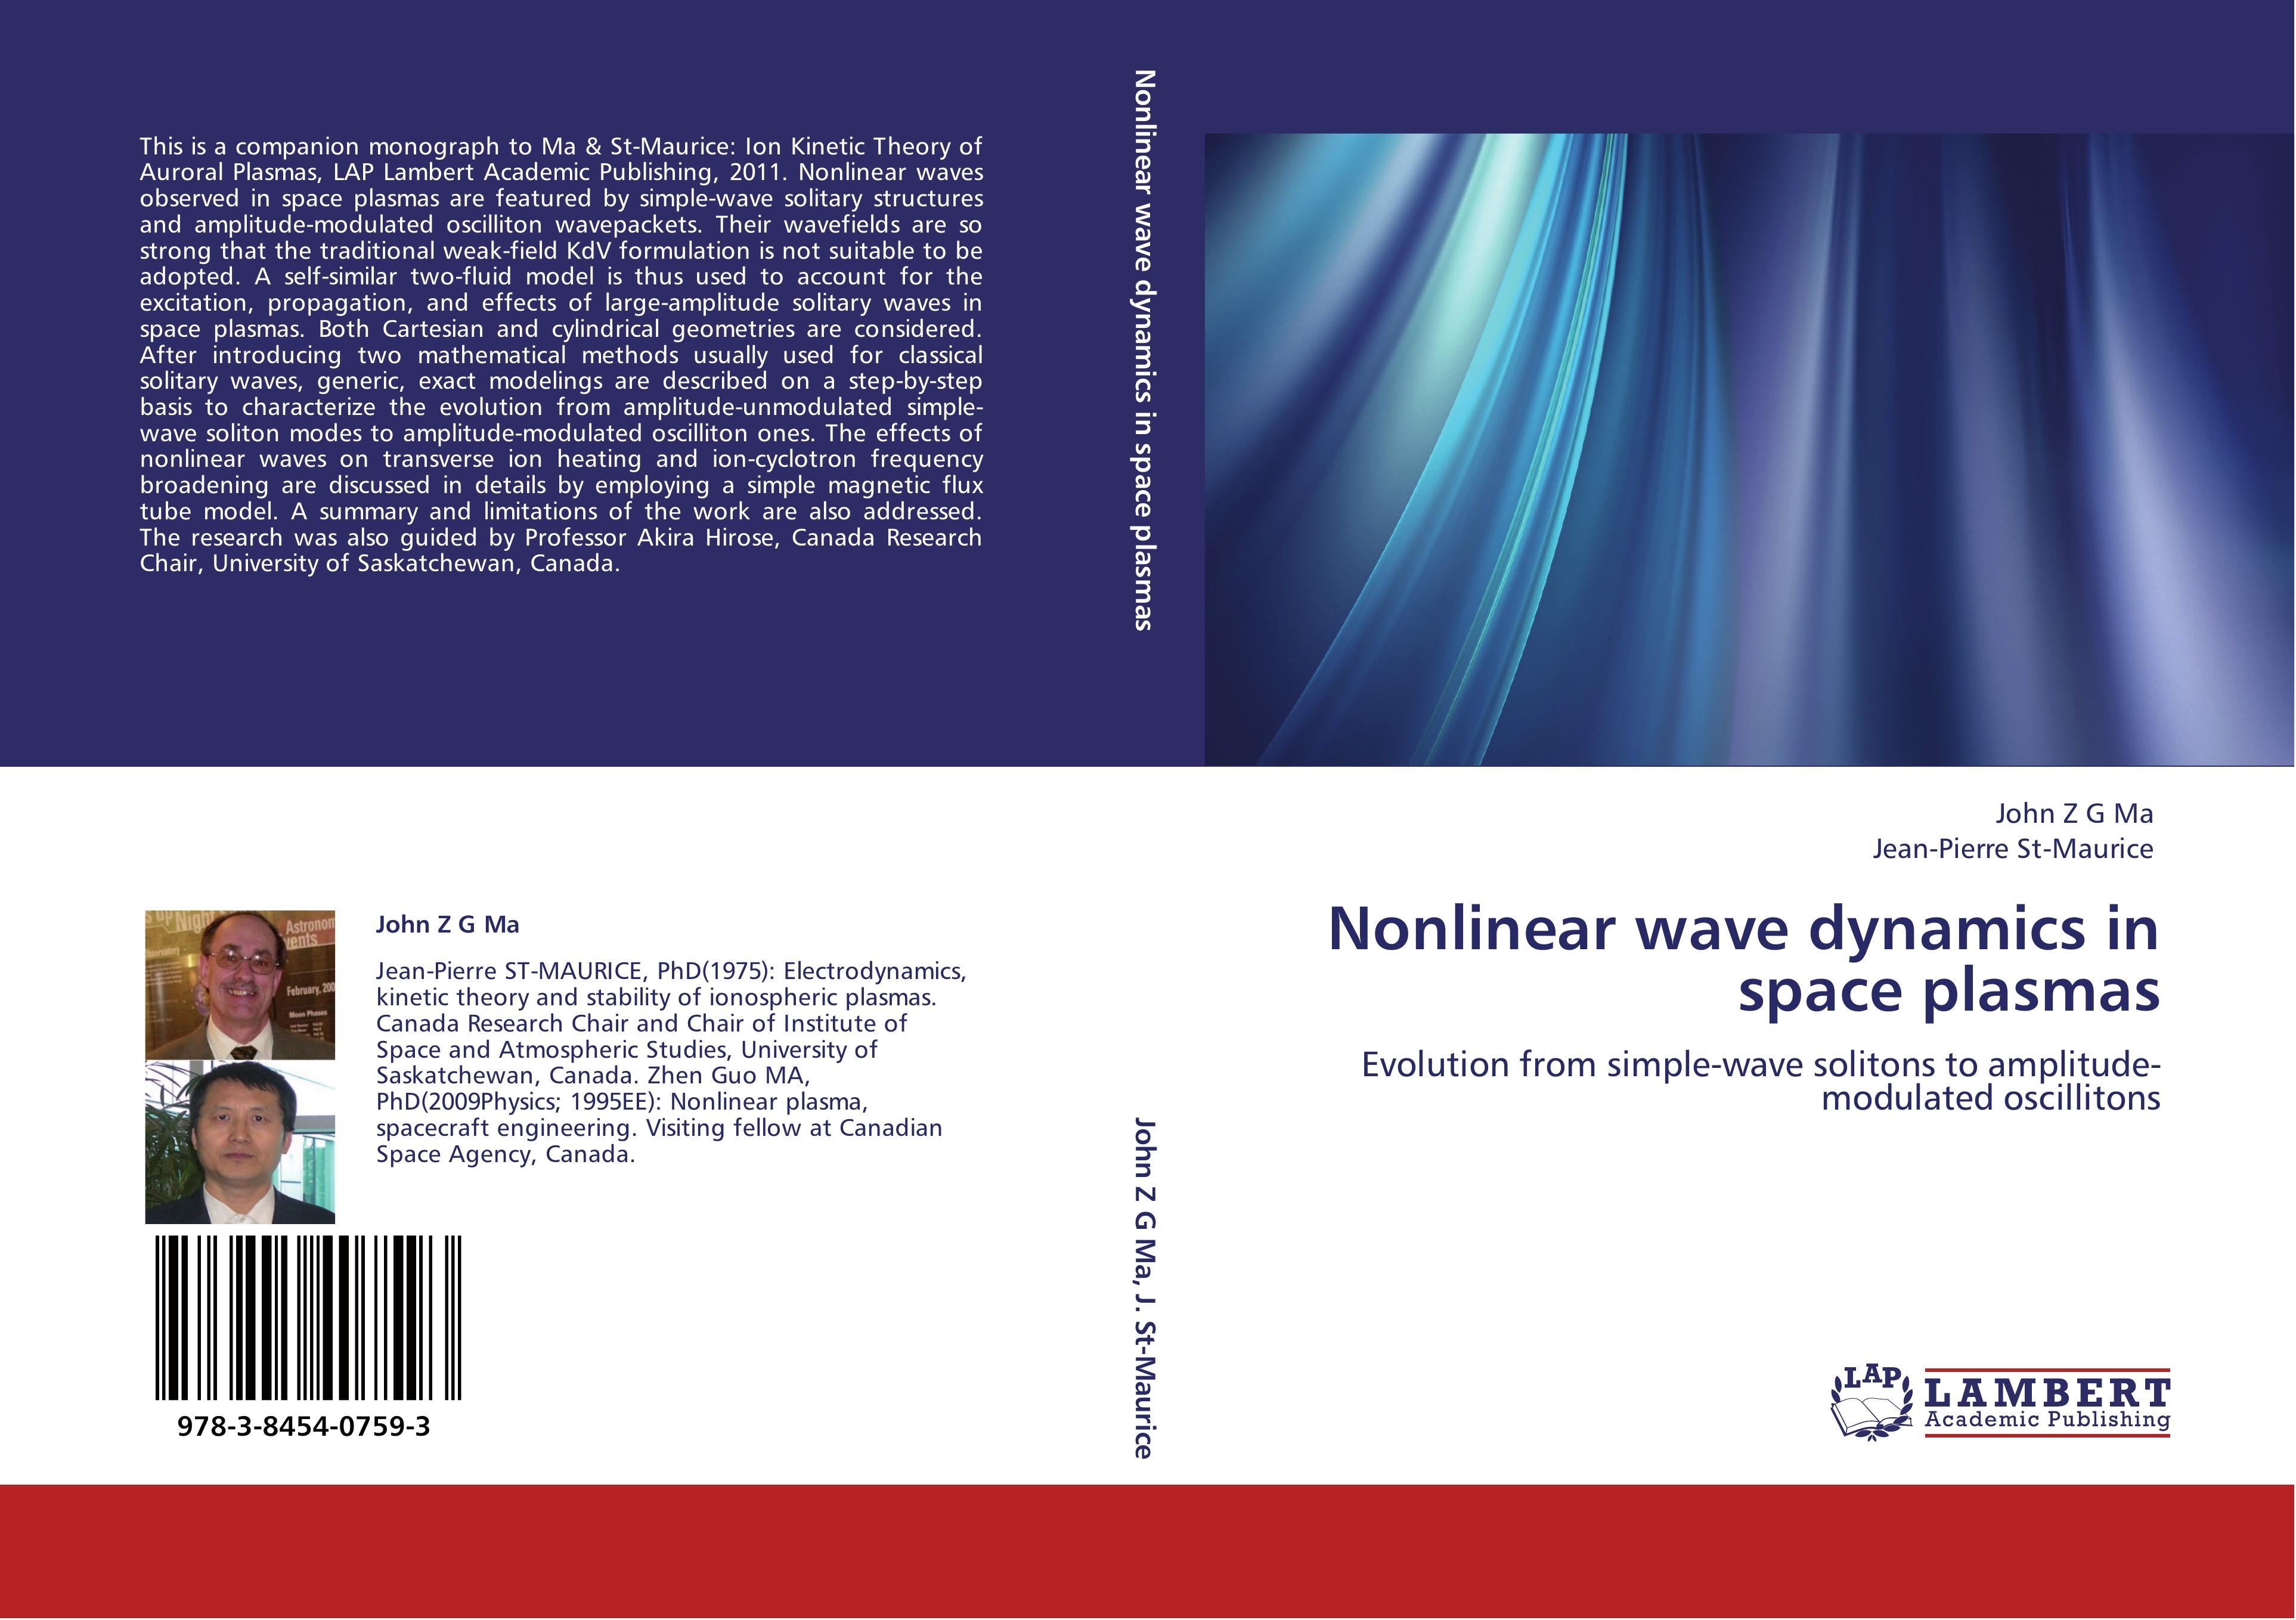 Nonlinear wave dynamics in space plasmas  Evolution from simple-wave solitons to amplitude-modulated oscillitons  John Z G Ma (u. a.)  Taschenbuch  Paperback  Englisch  2011 - Ma, John Z G